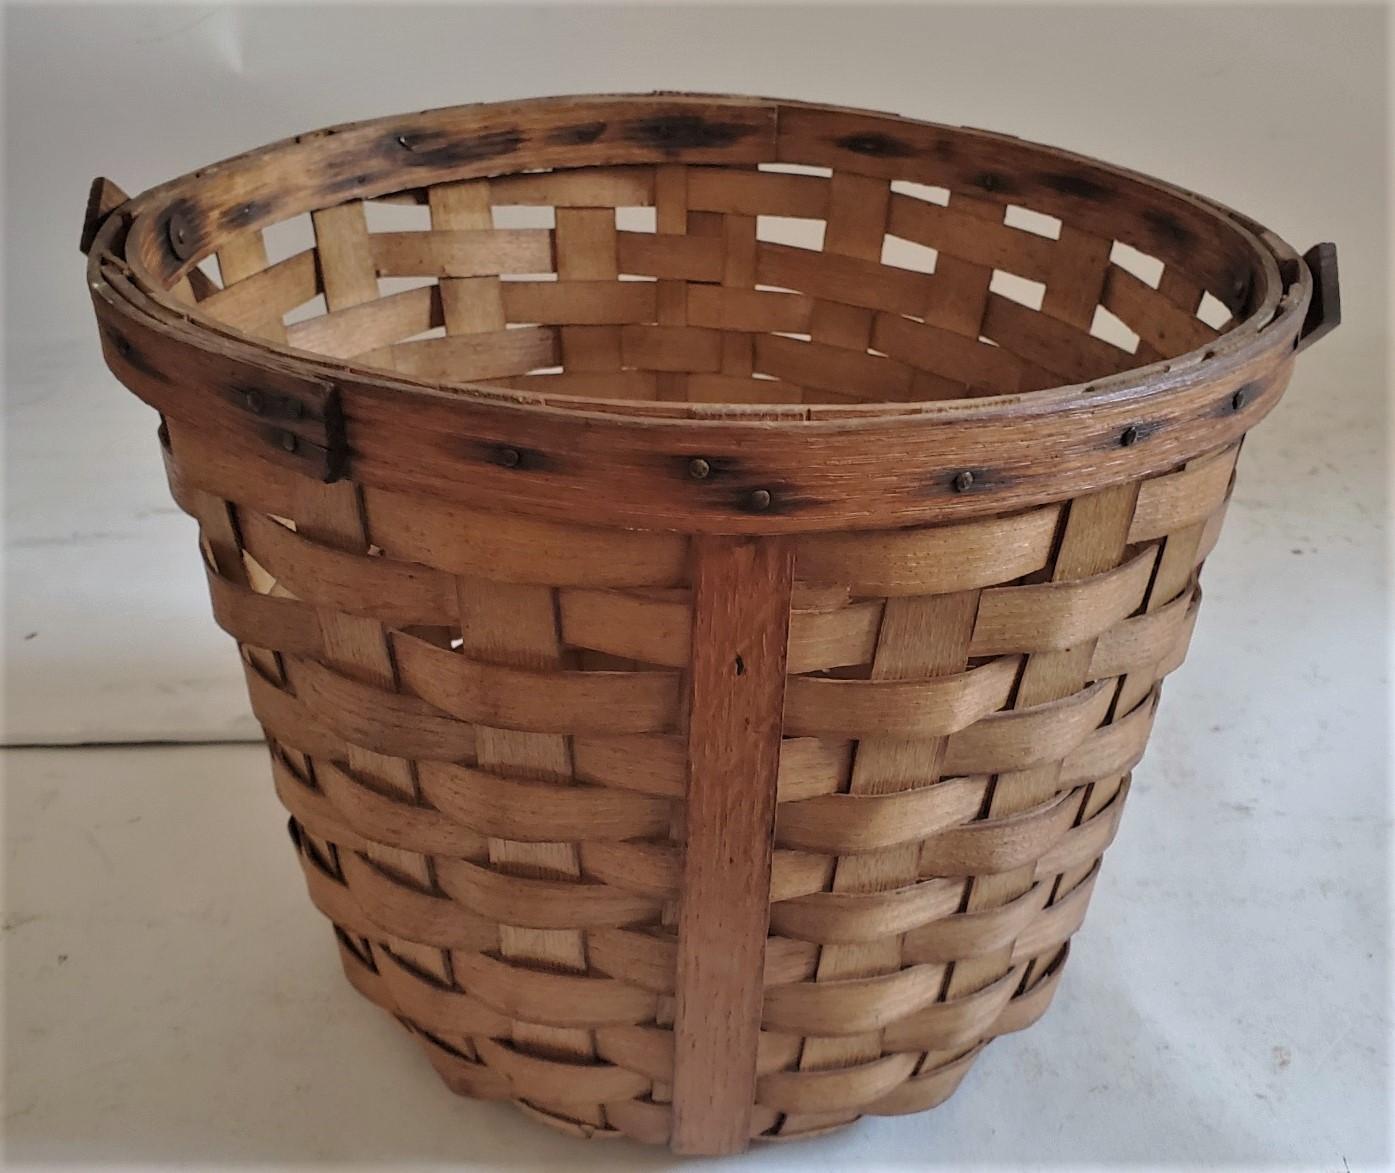 This fine and unusual swing handled apple basket is in good condition with a nice aged patina. Condition is very good.